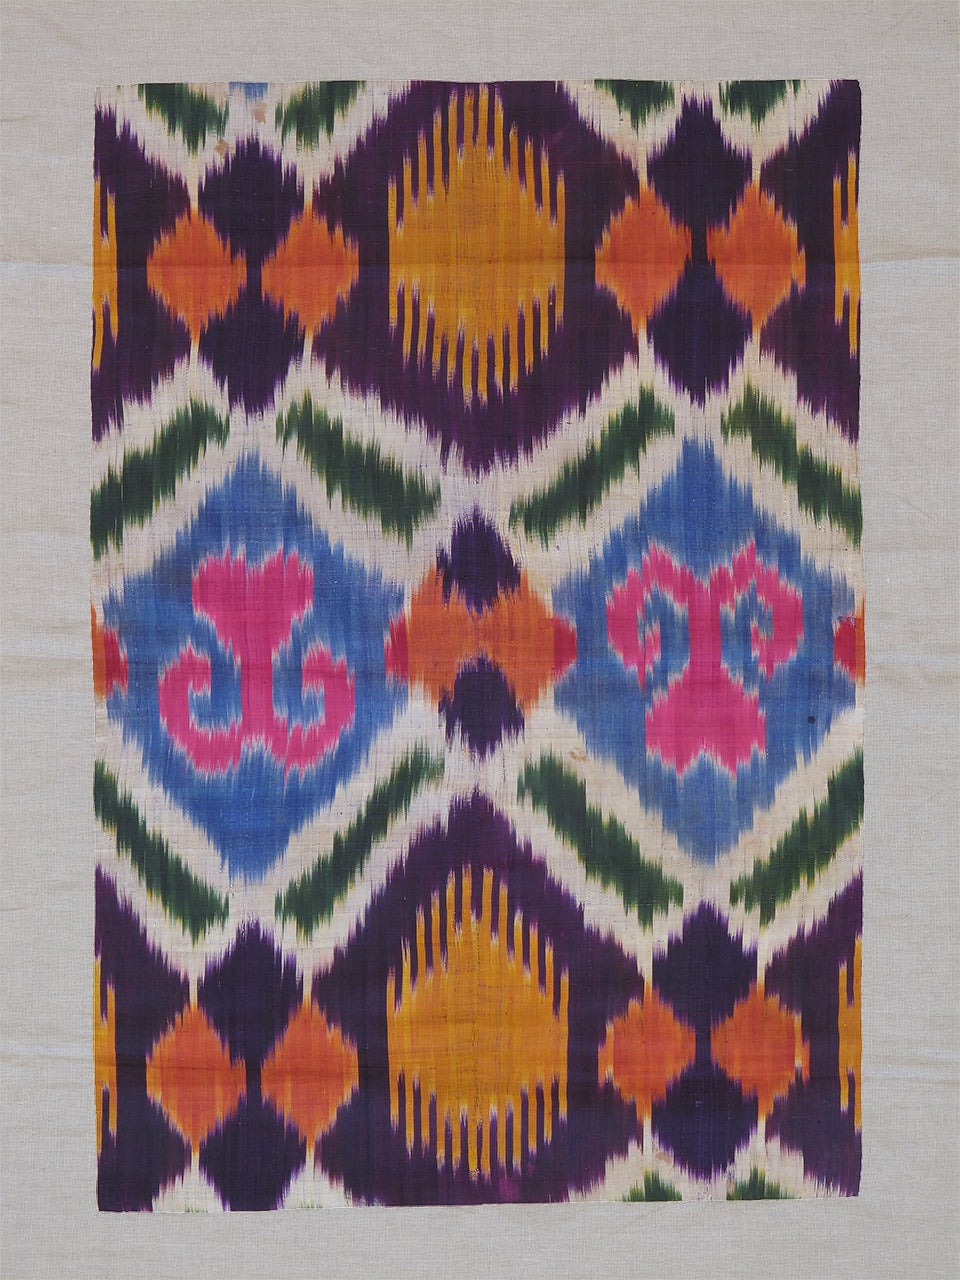 A beautiful antique textile from Uzbekistan in Central Asia, a fragment from a larger panel woven in silk ikat technique. Such fabrics were traditionally used to make garments or as ceremonial covers.

The piece is professionally mounted on linen